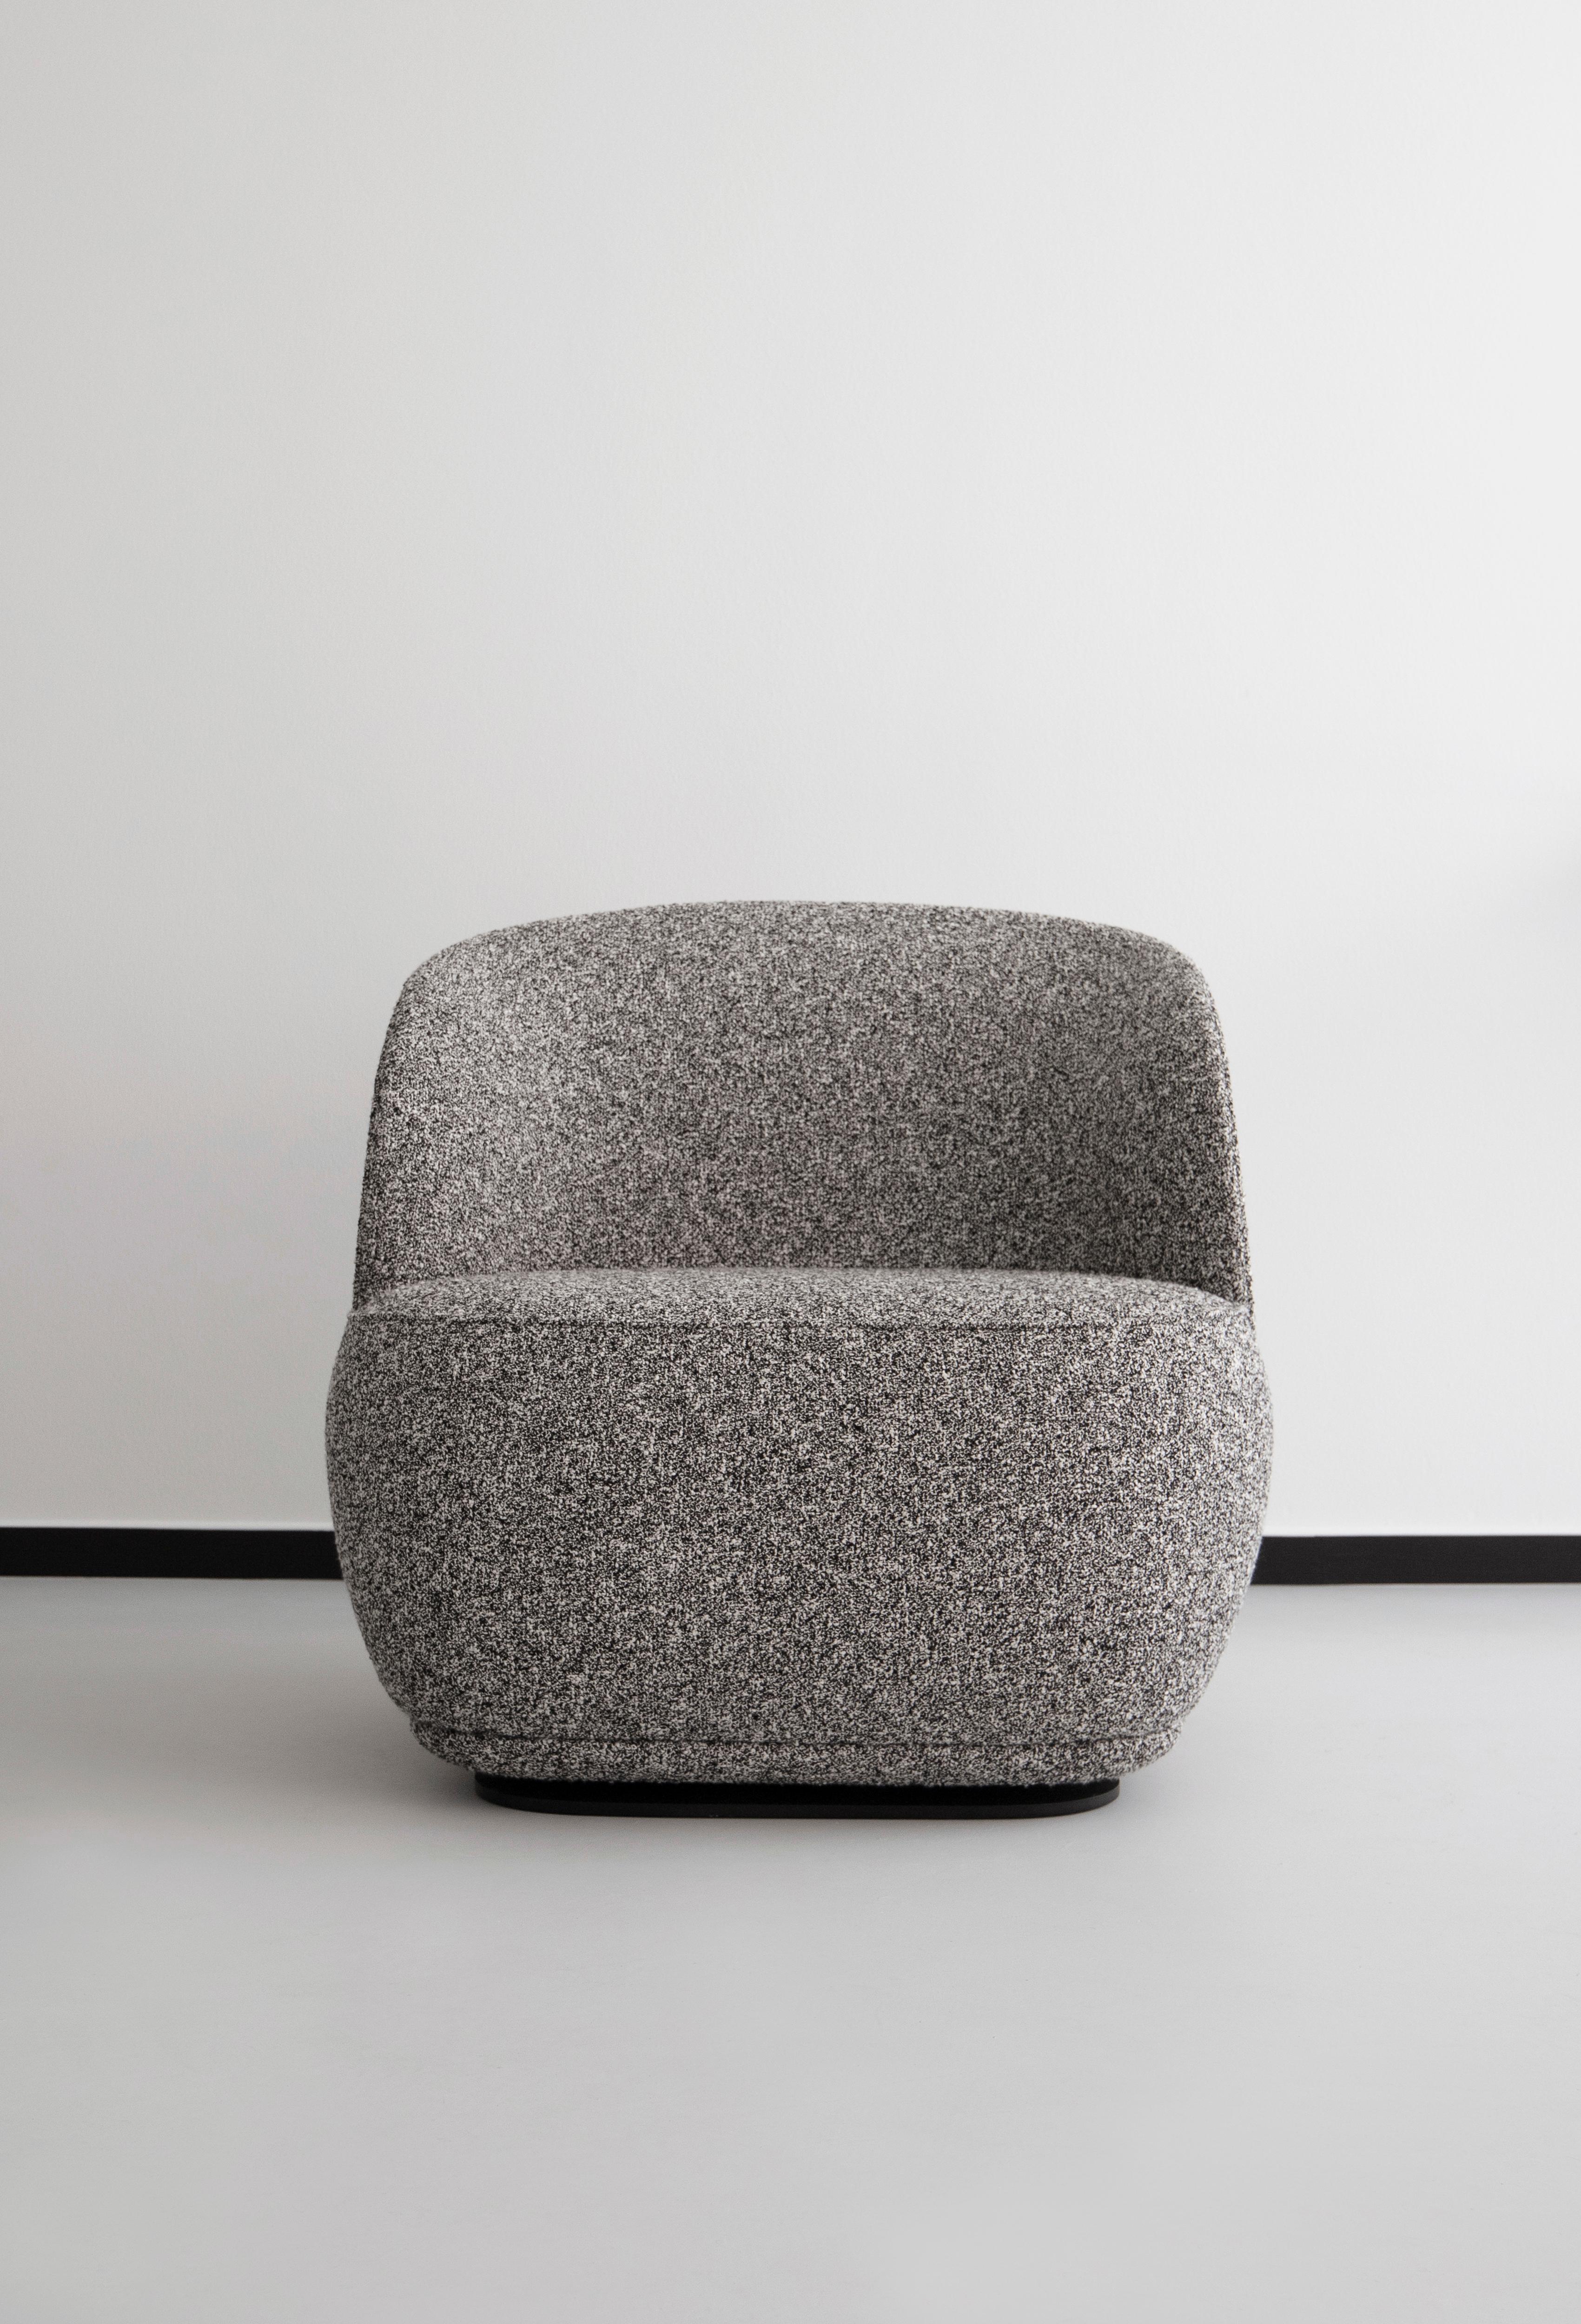 La Pipe lounge, armchair 
Design: Friends & Founders

Available with fixed base or return swivel
Upholstery available in a wide range of fabrics and leathers
Model shown (fabric): Kvadrat (Sahco) Zero 004
Swivel: as an option

Price may vary